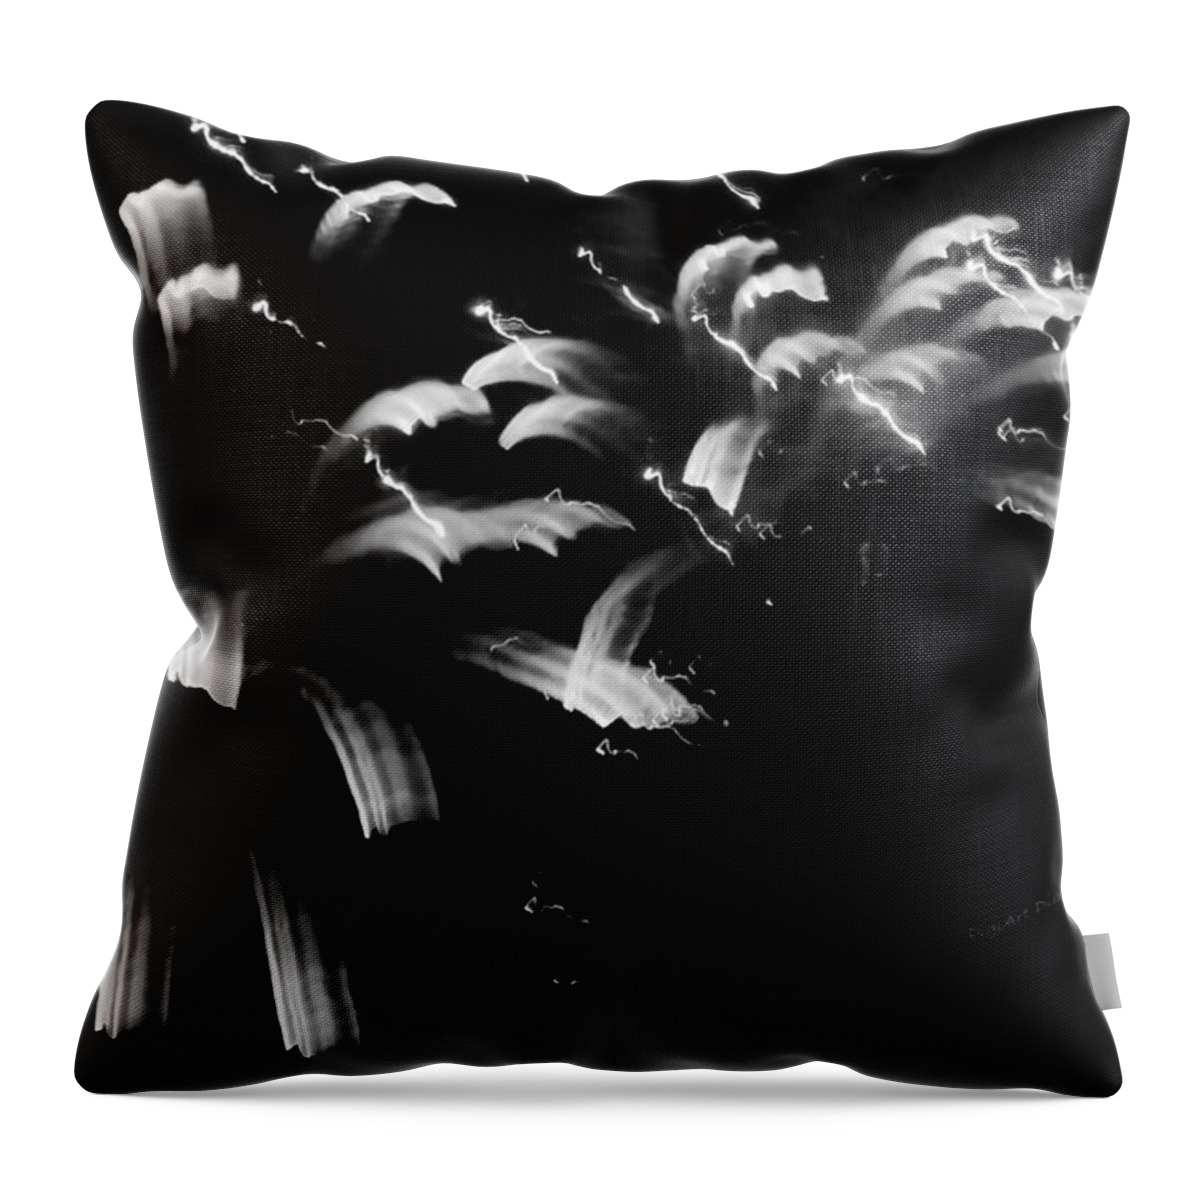 Fireworks Throw Pillow featuring the photograph Licorice Sky by DigiArt Diaries by Vicky B Fuller